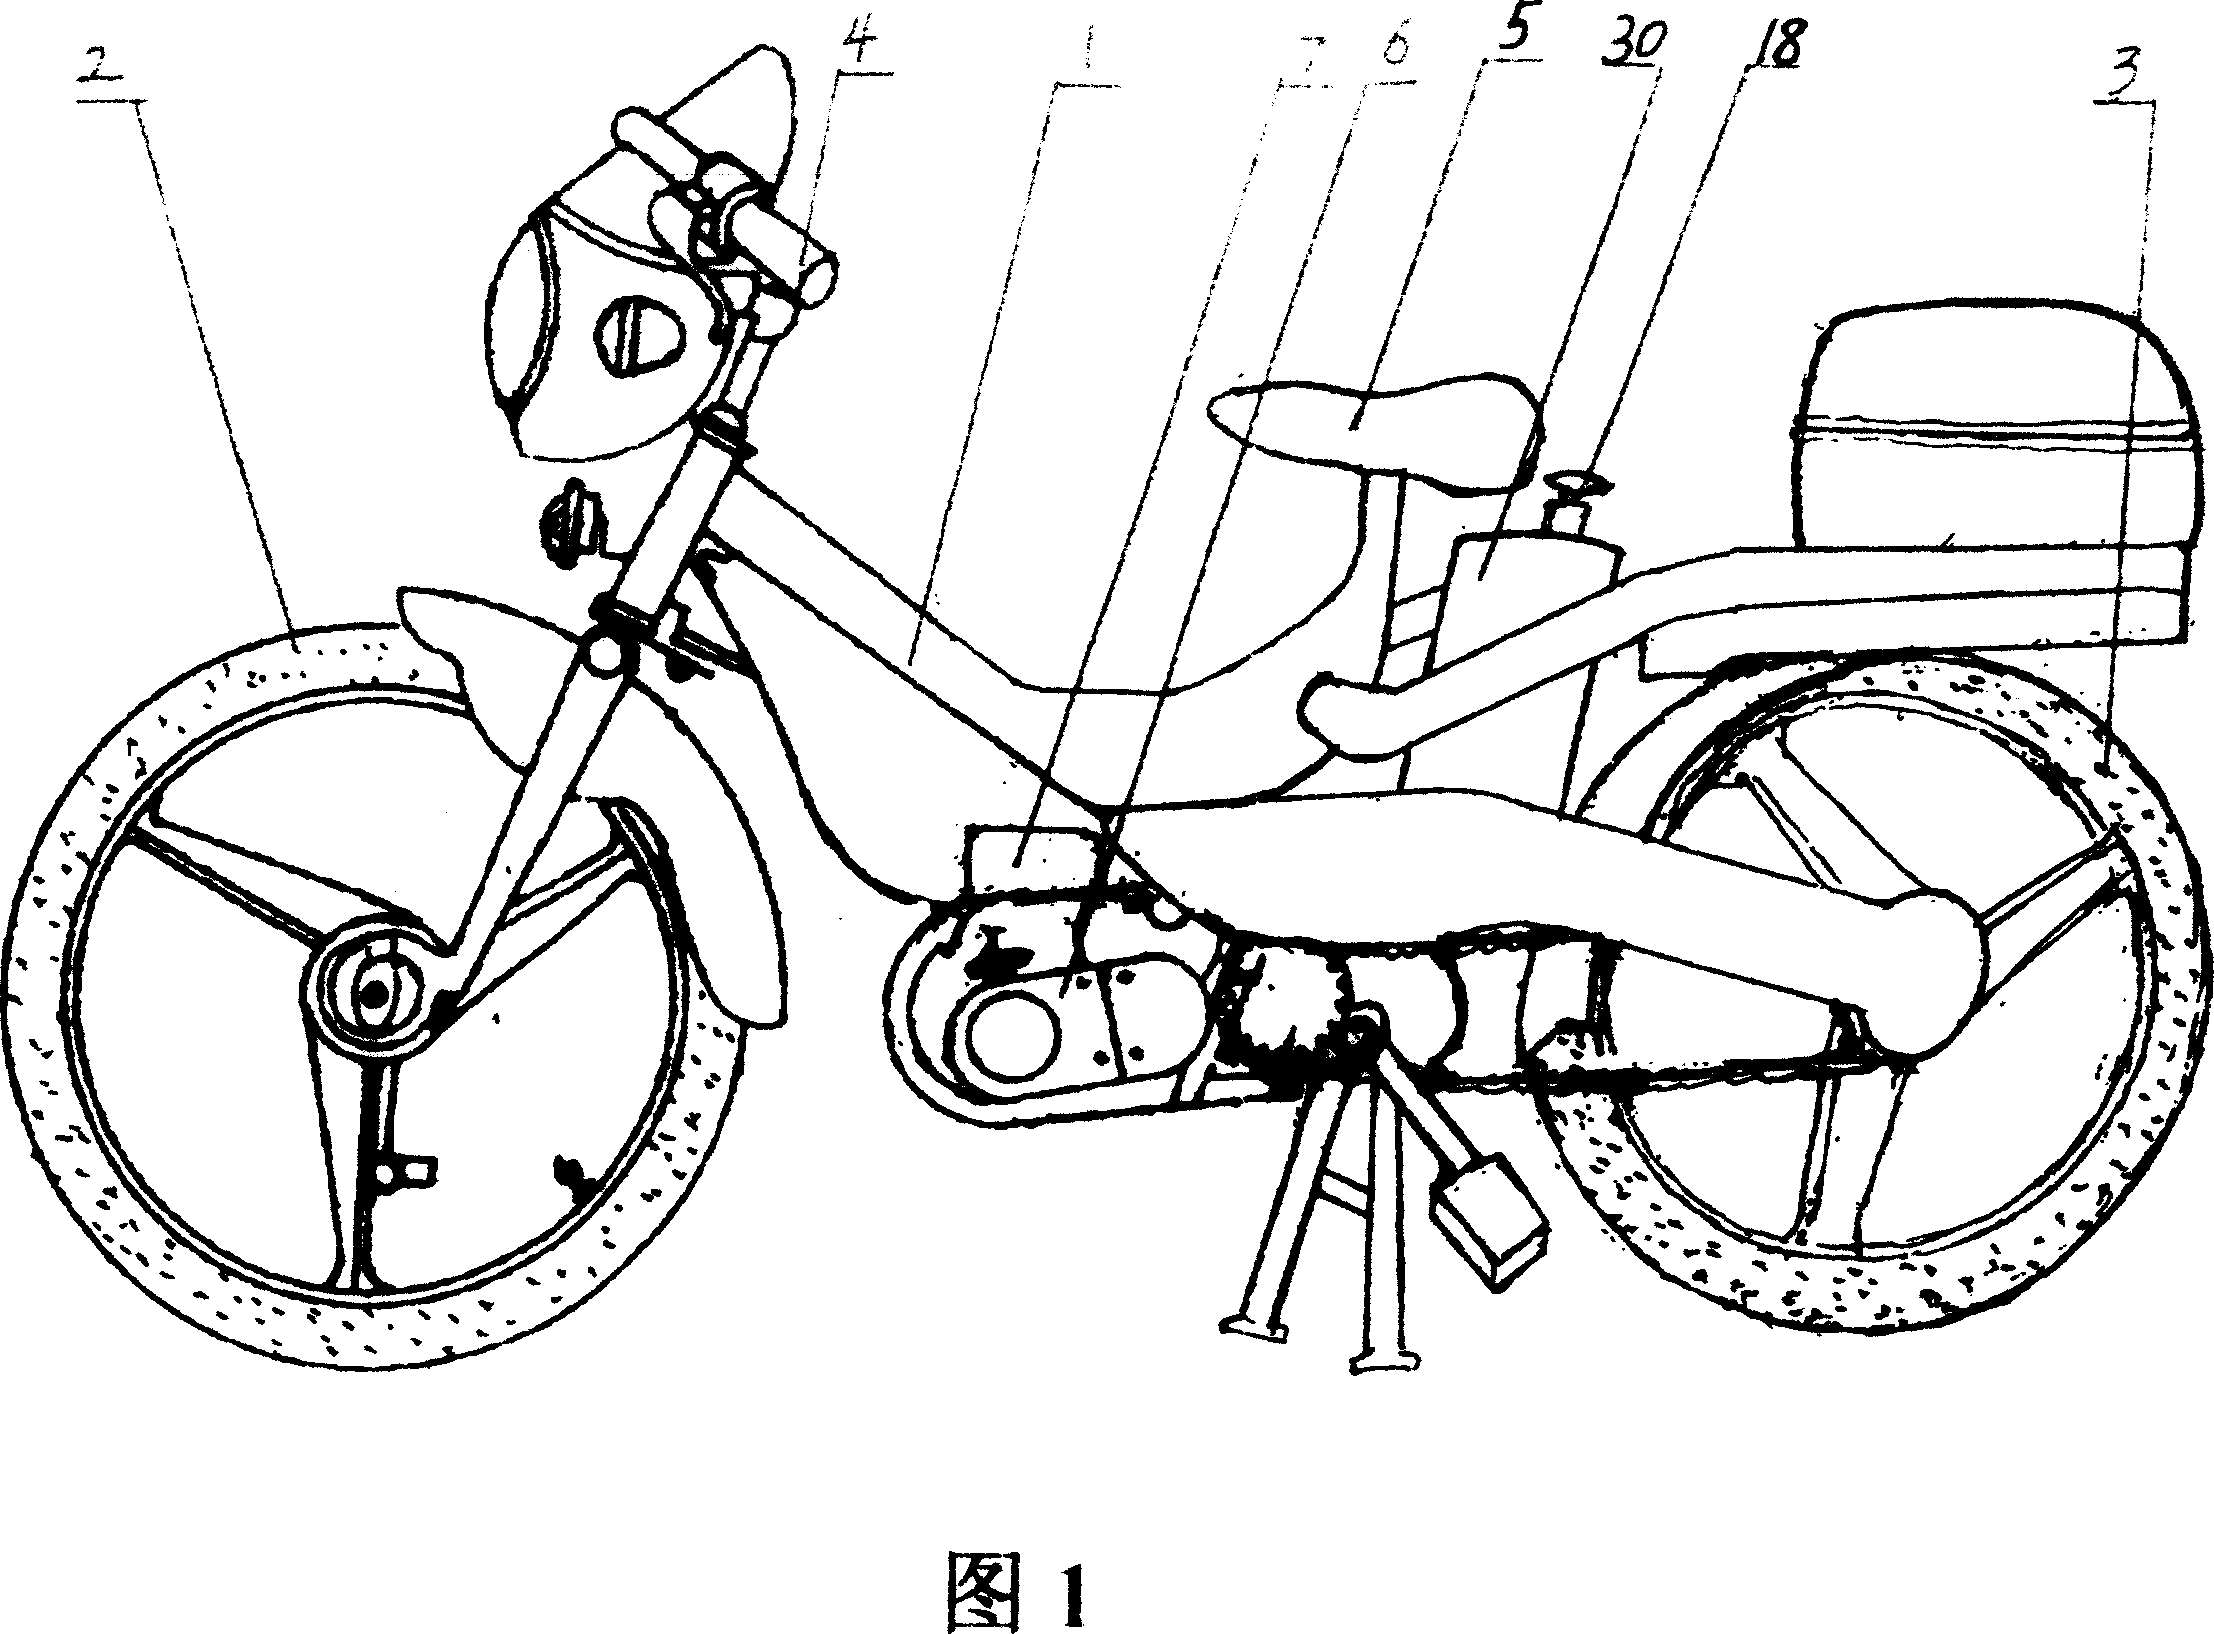 Liquefied petroleum gas driven bicycle